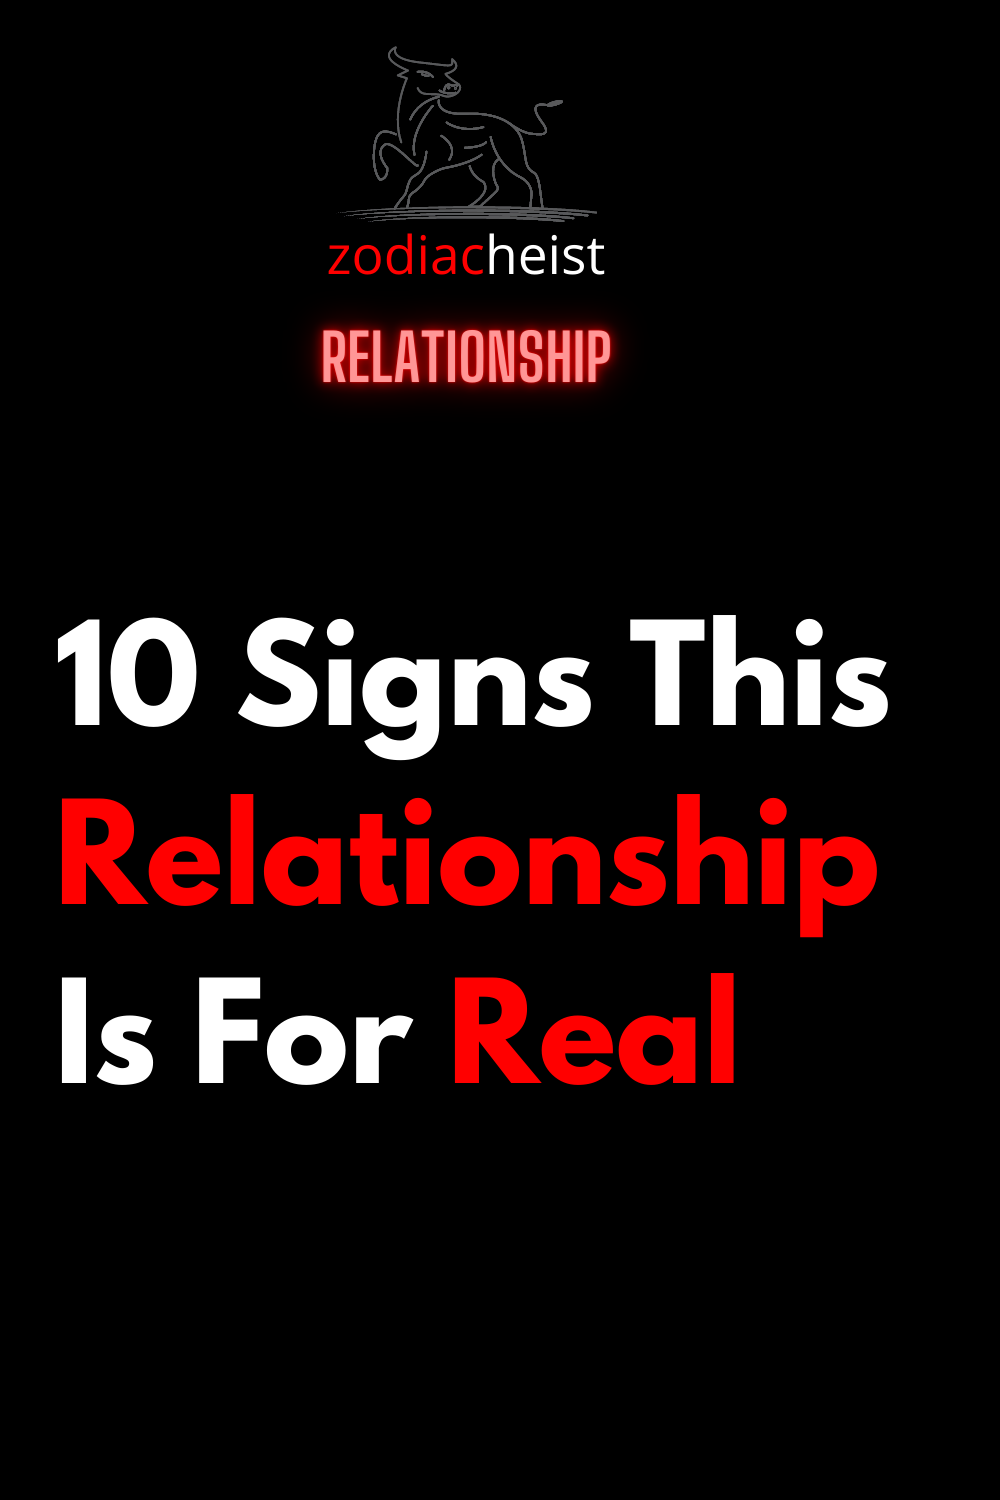 10 Signs This Relationship Is For Real